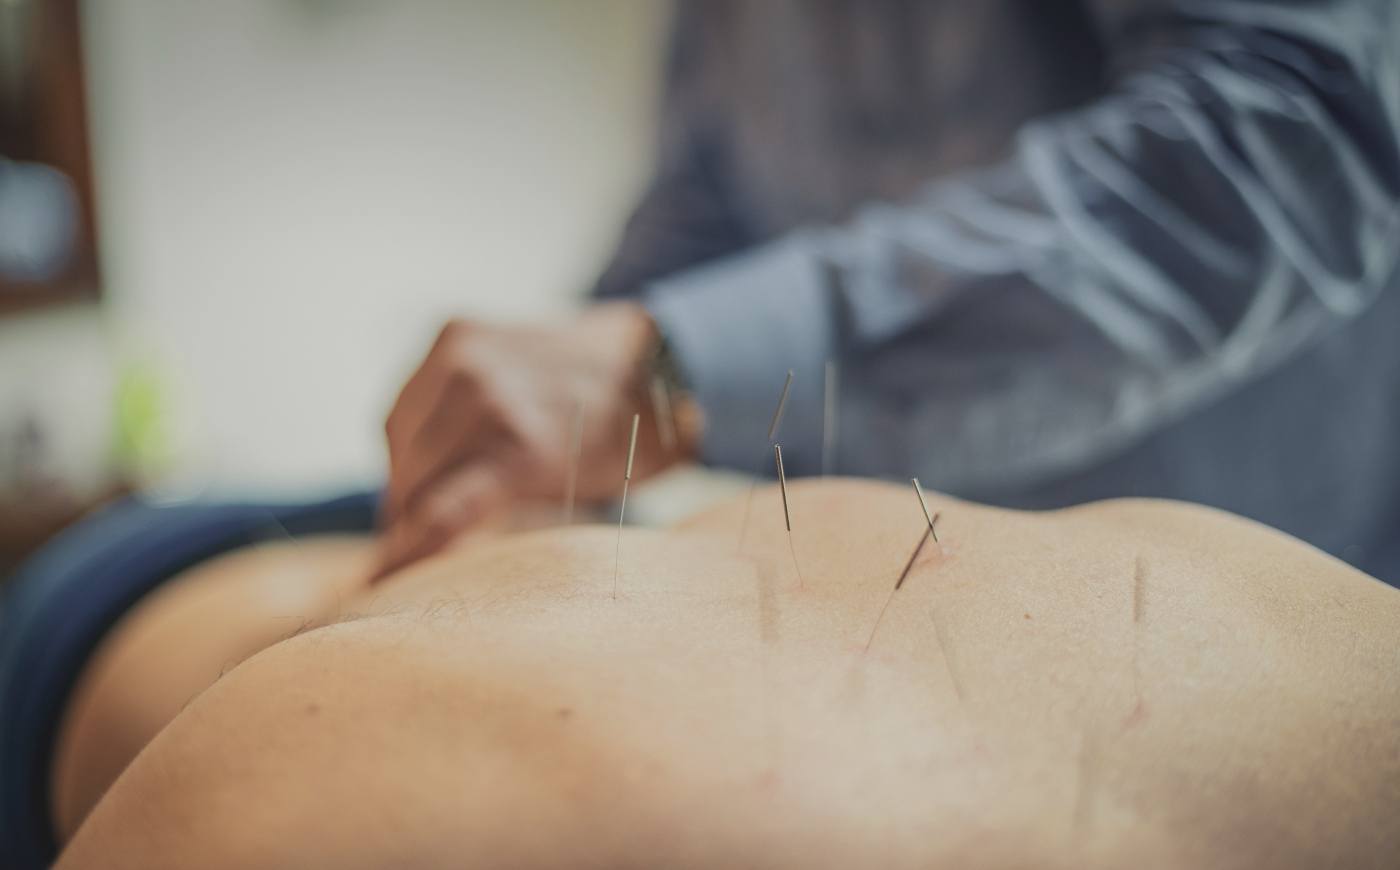 Physician performing medical acupuncture